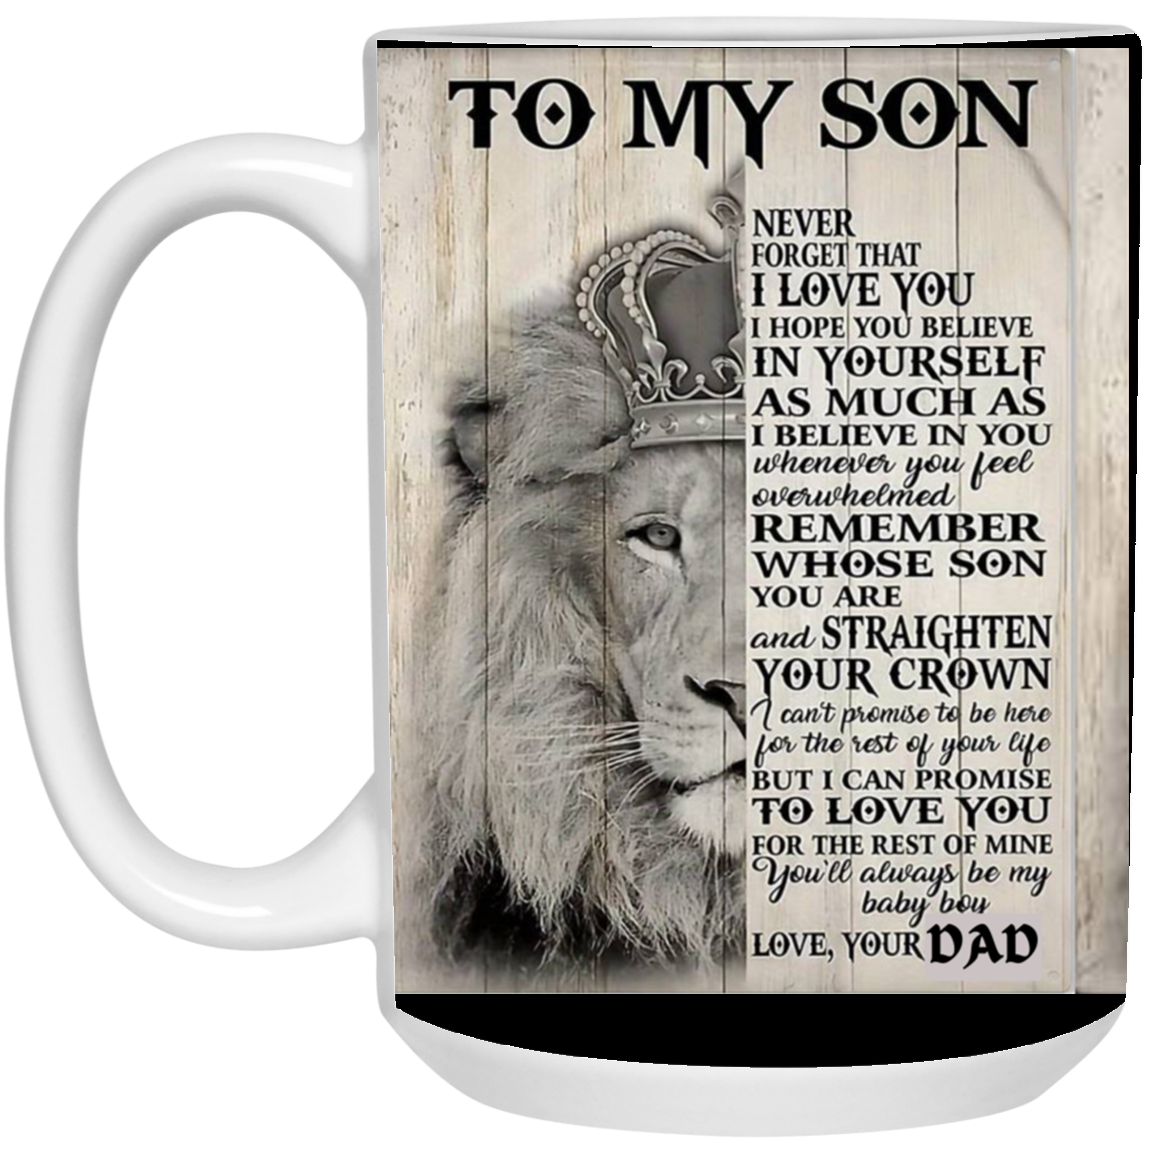 To My Son Never Forget King-DAD -Premium Mink Sherpa Blanket 50x60